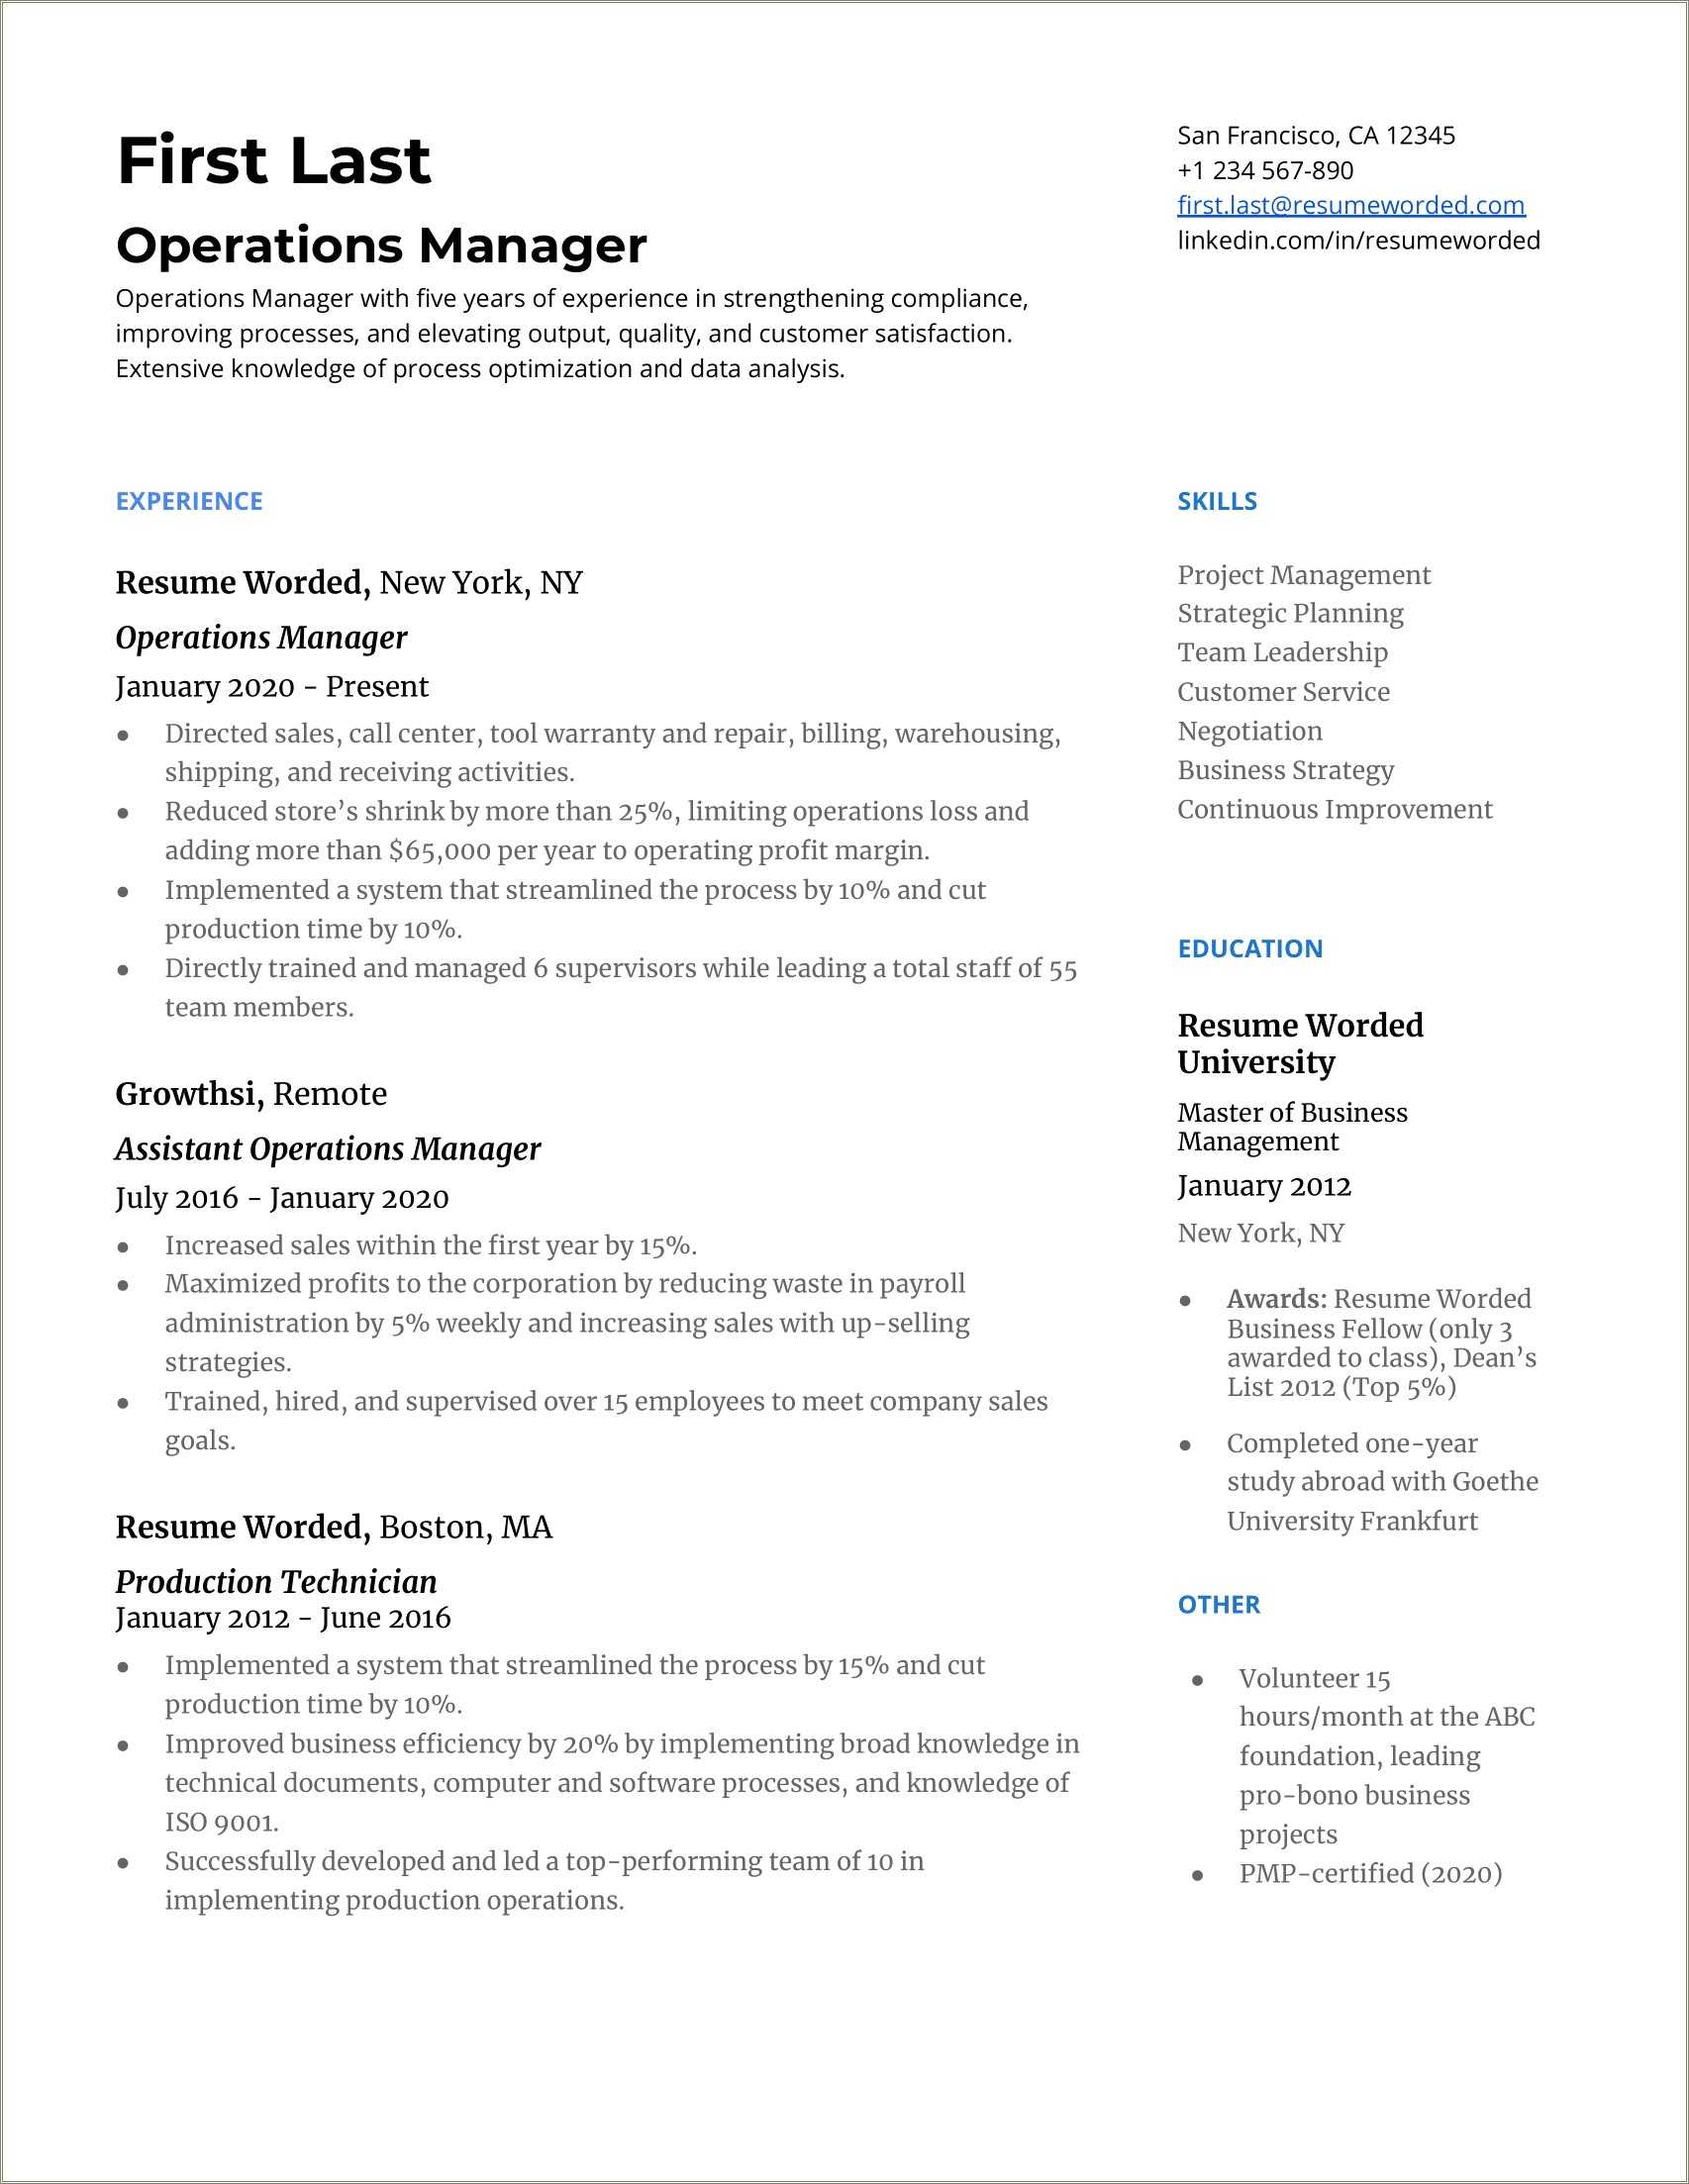 Credit Card Operations Manager Resume